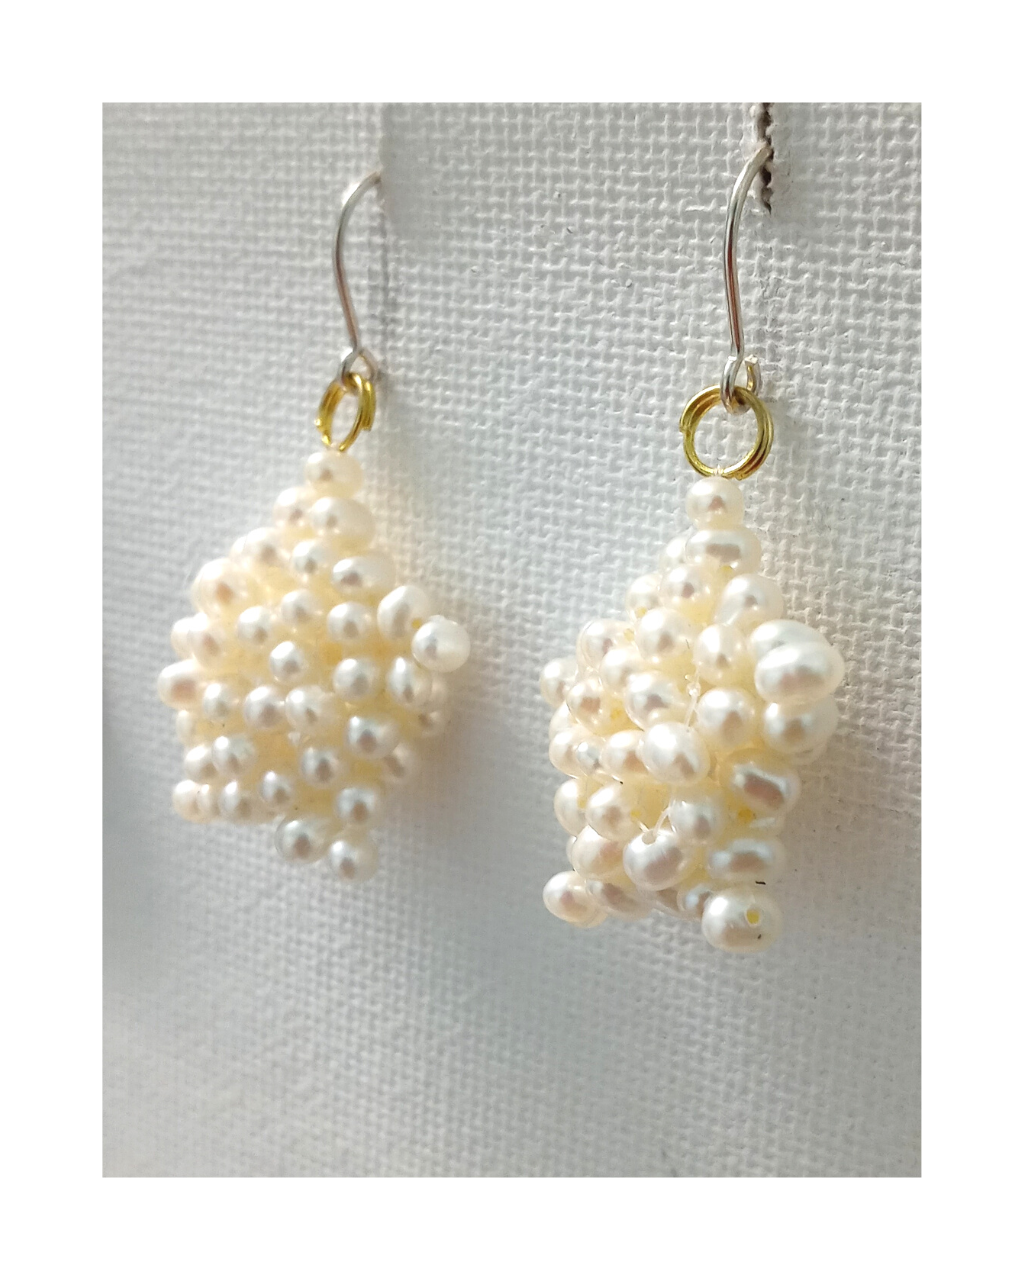 Amazing Luscious Woven White Pearl Star Design with Goldfilled Jump Ring Connected to Sterling Earrings ONE ONLY